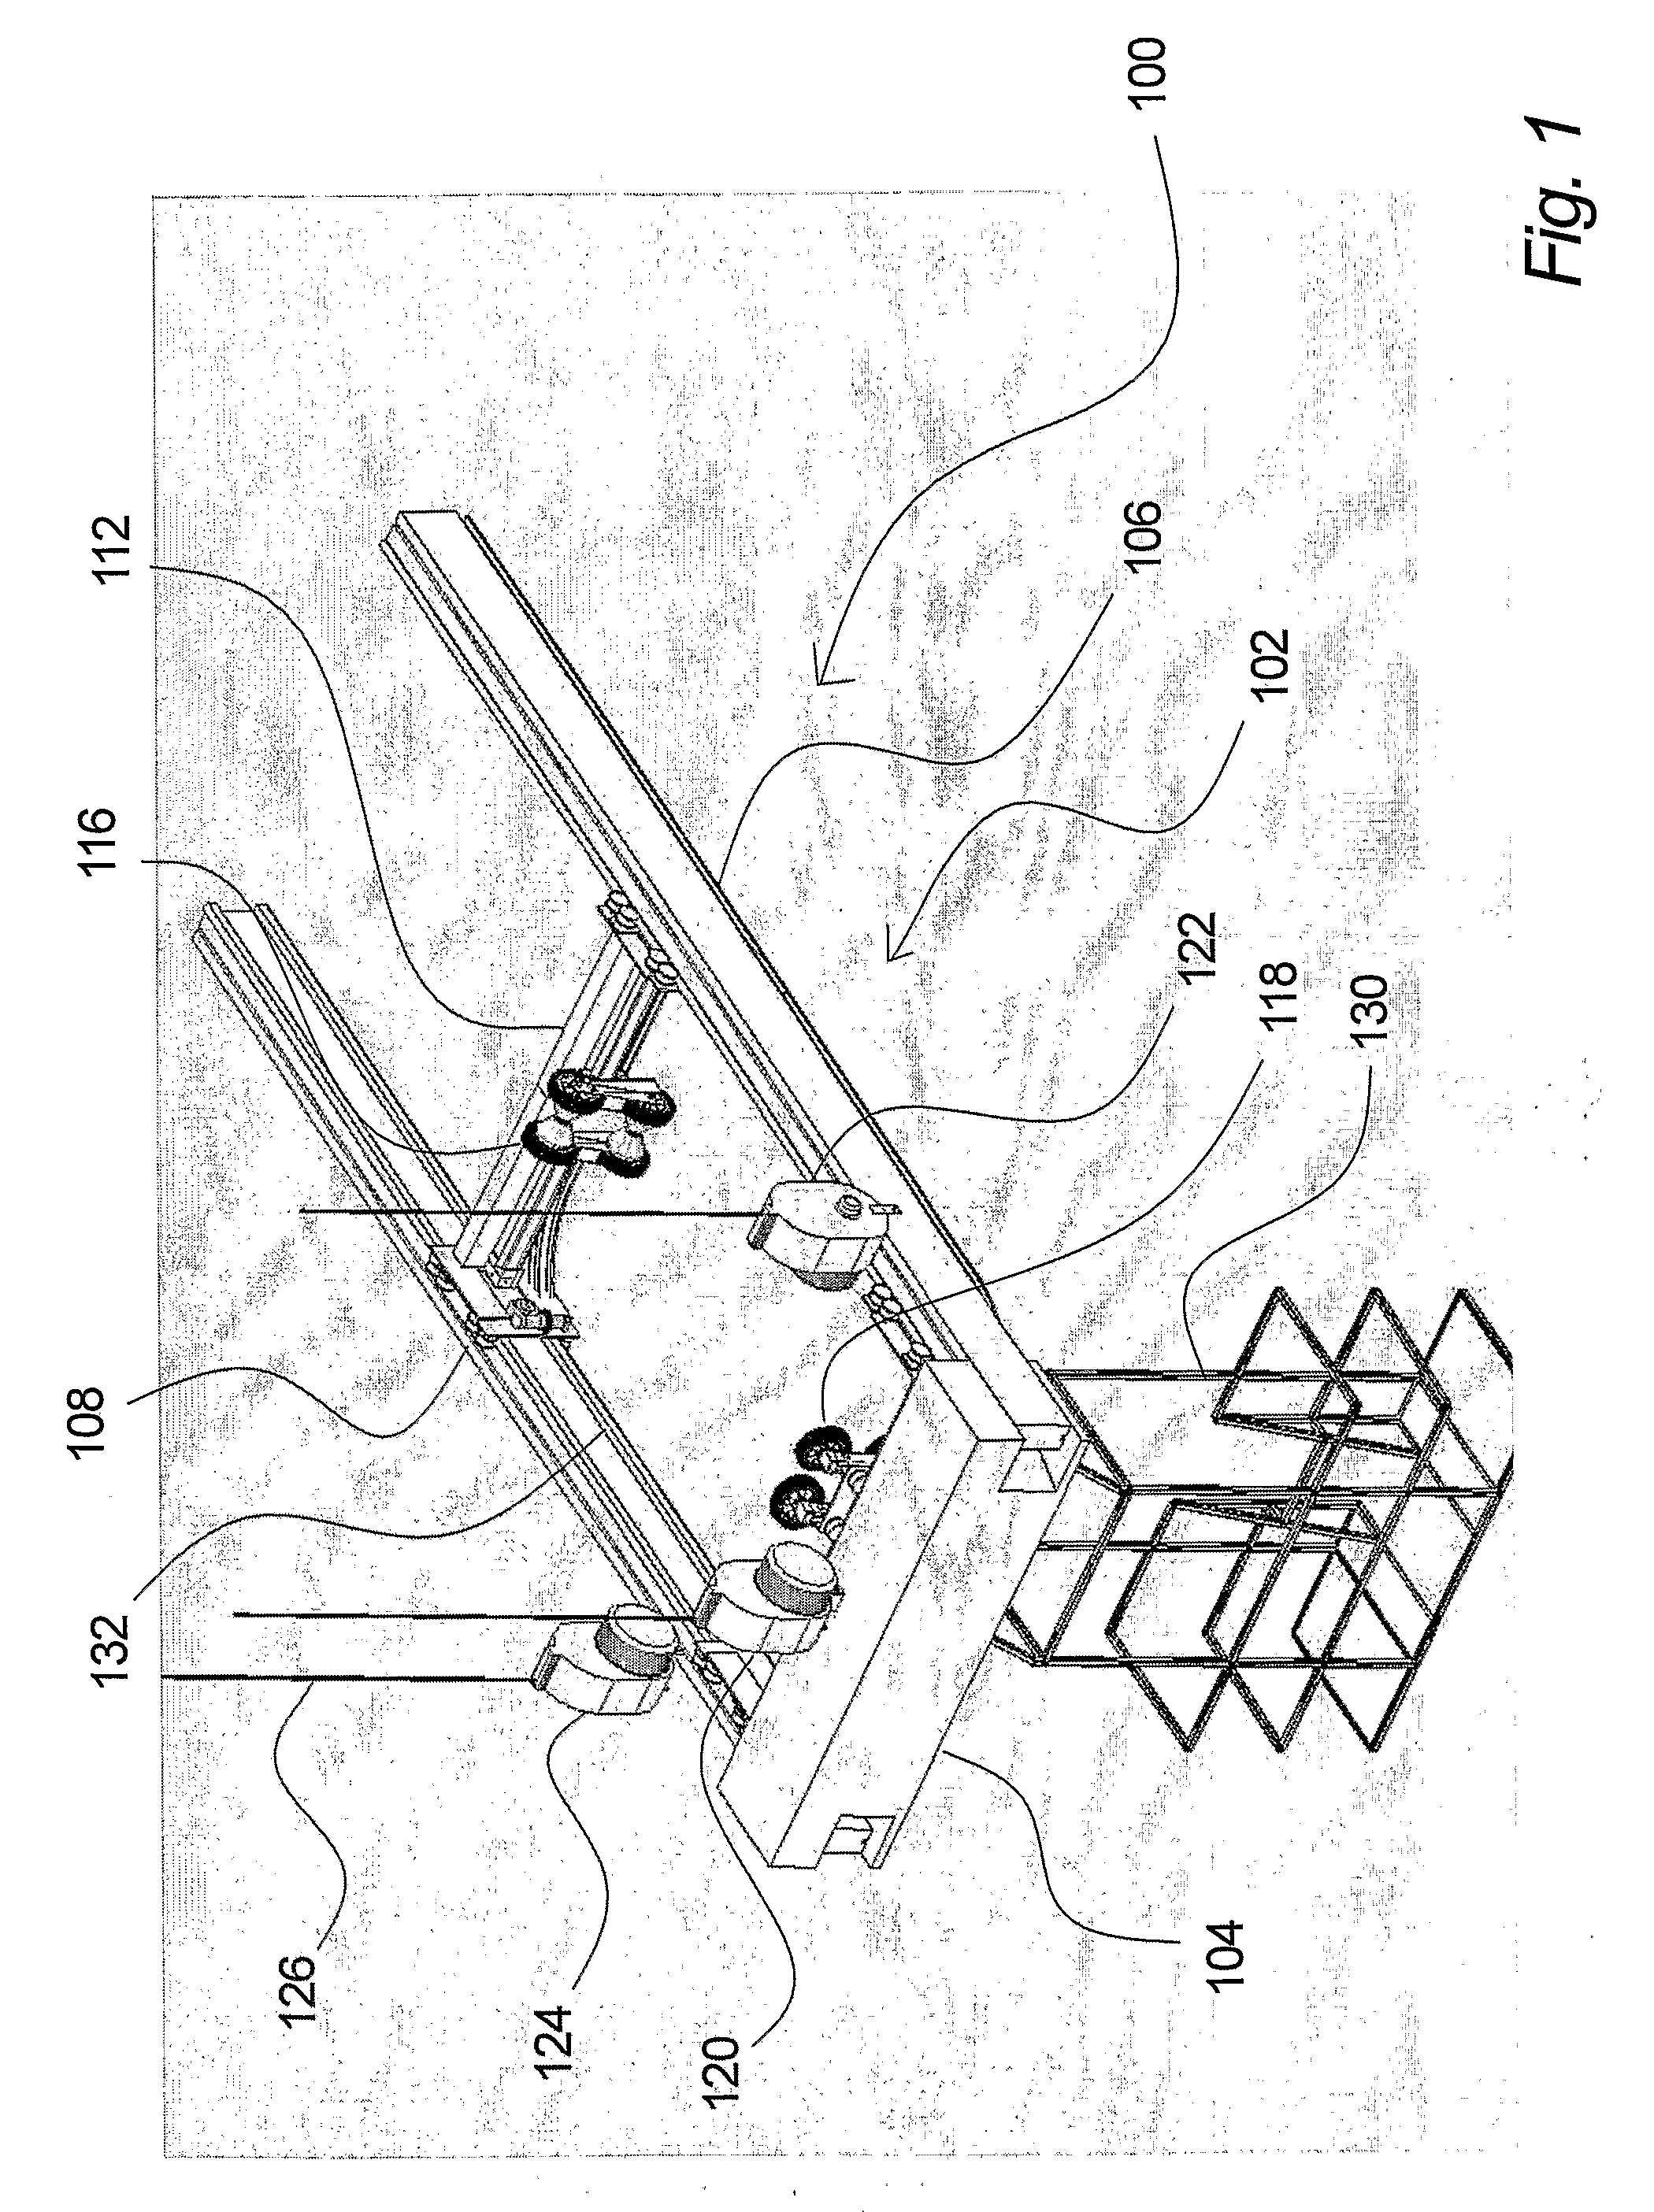 Device for enabling access to a structure above ground level